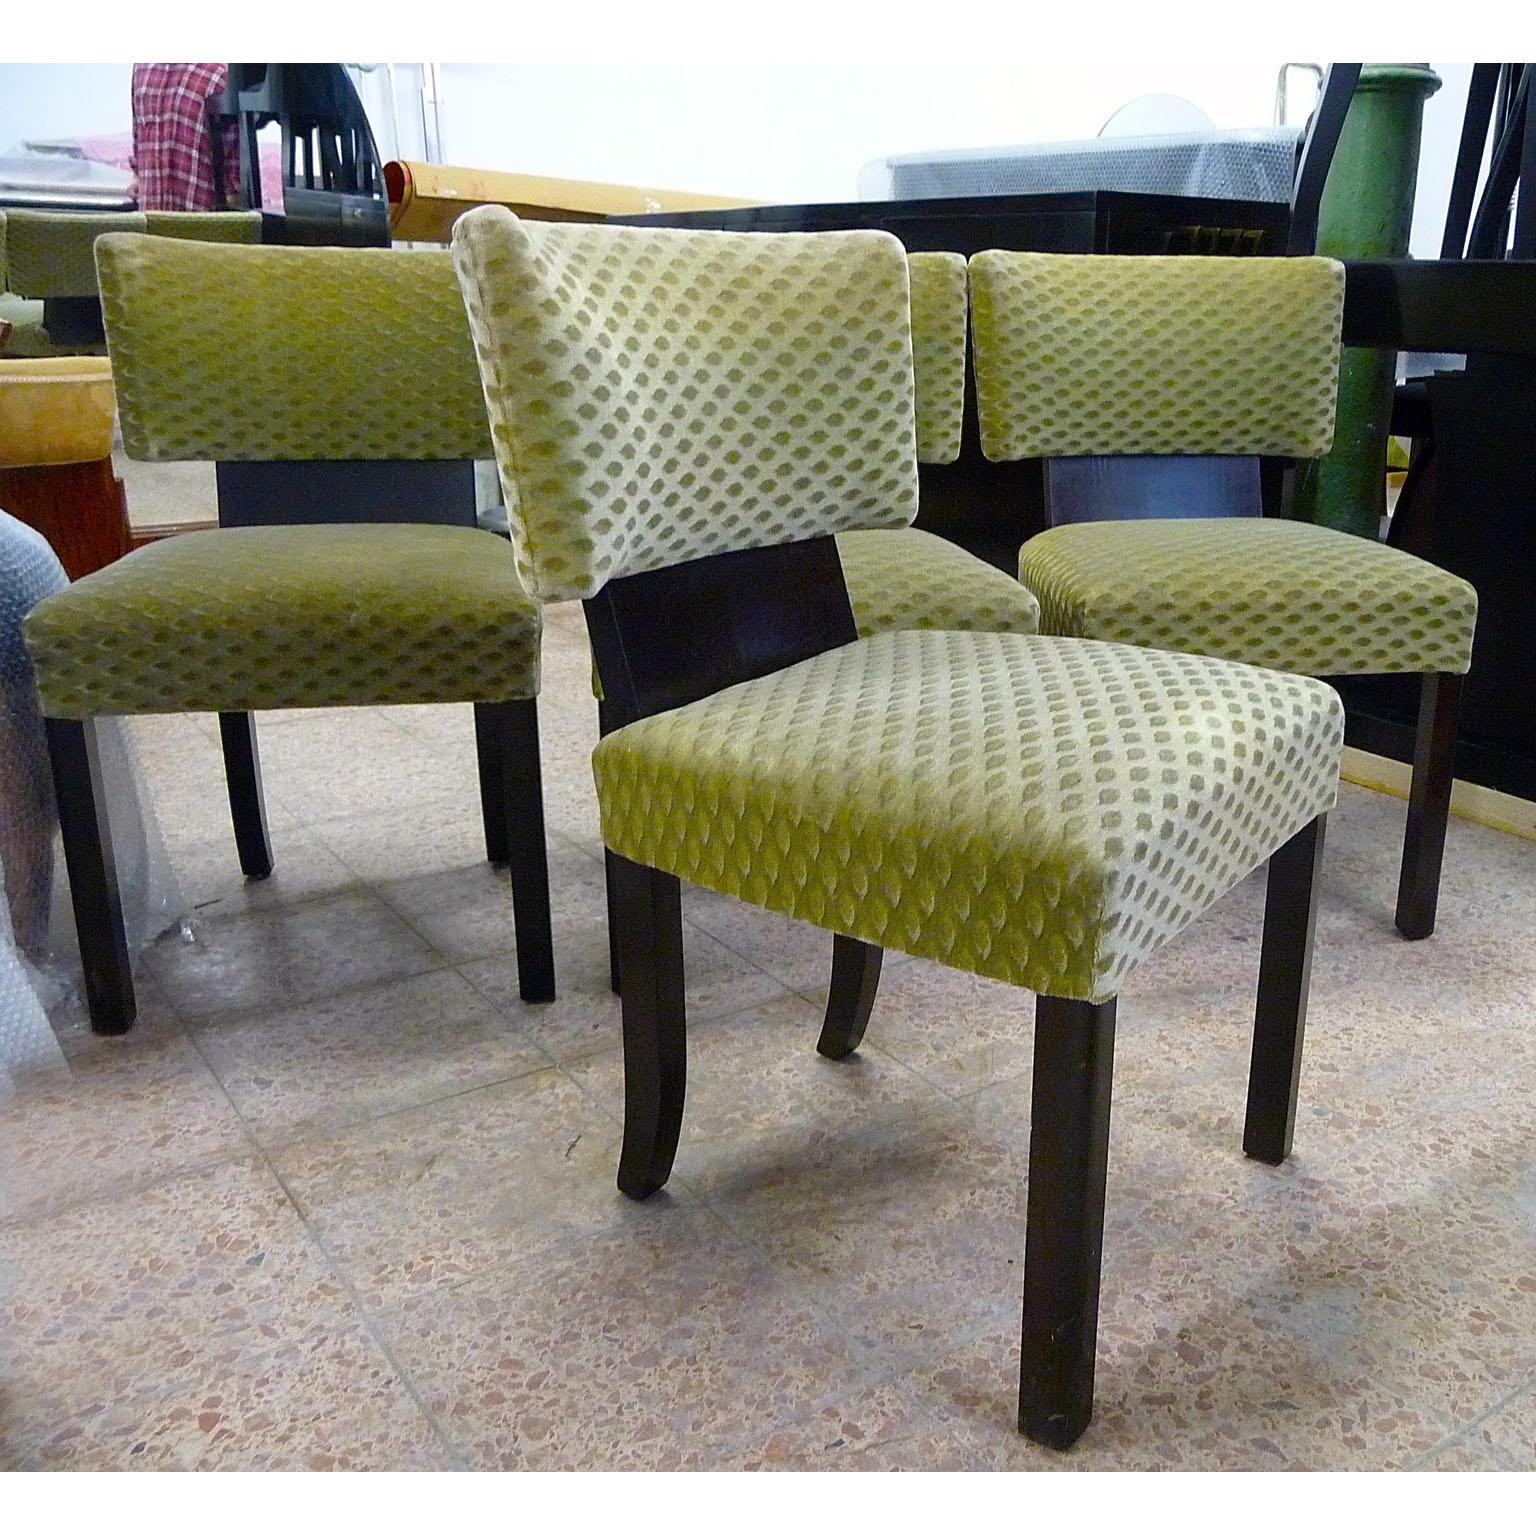 Art Deco Bauhaus Dining Chairs, Set of Four, Bruno Paul Design, Germany, 1930s 1